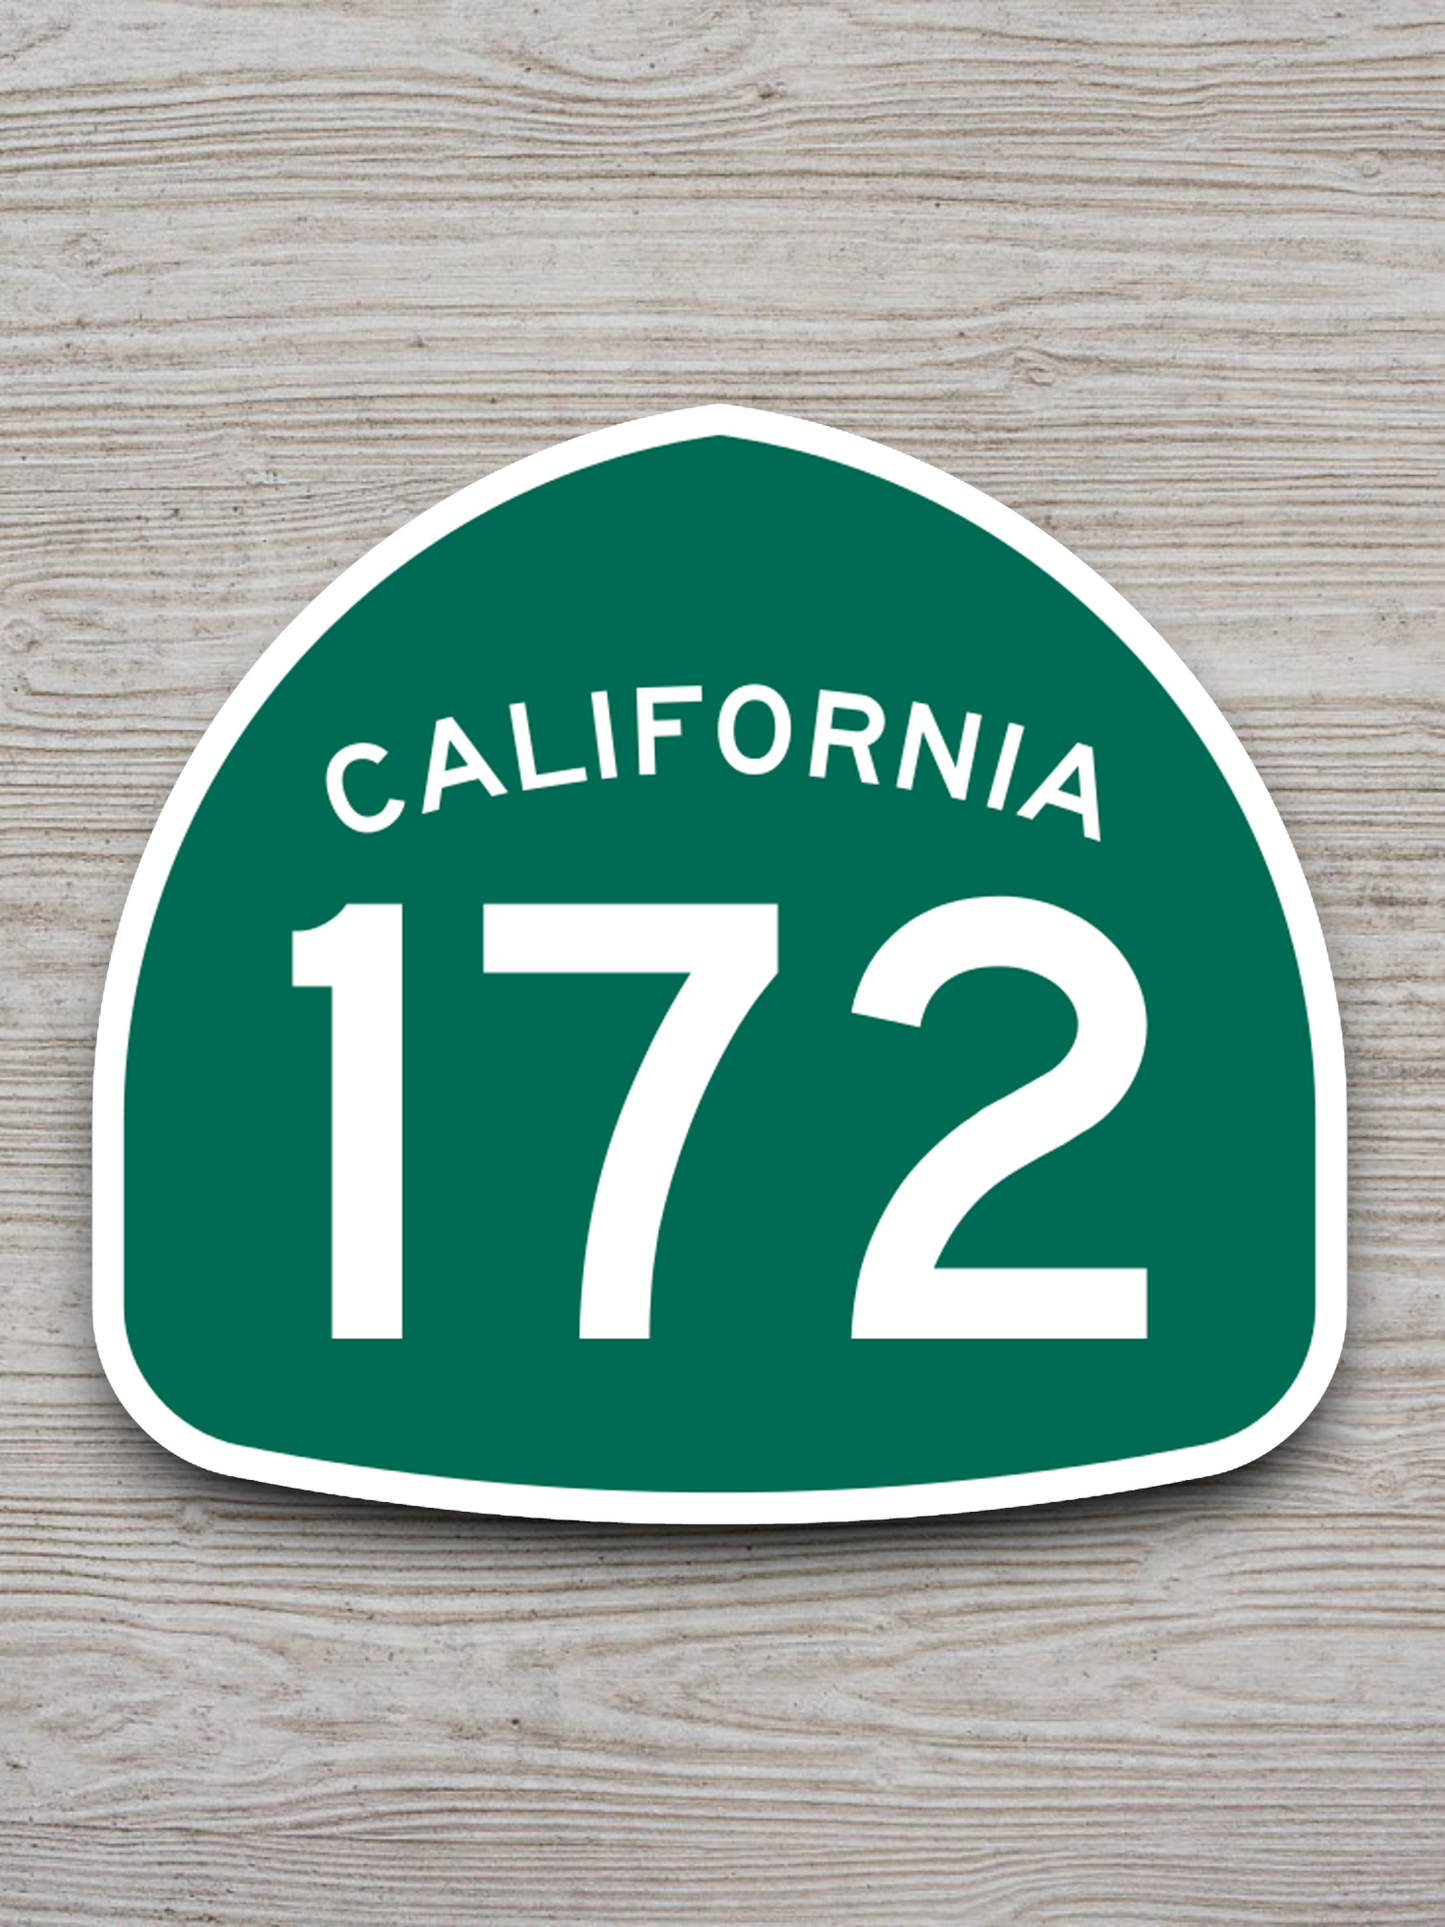 California State Route 172 Road Sign Sticker